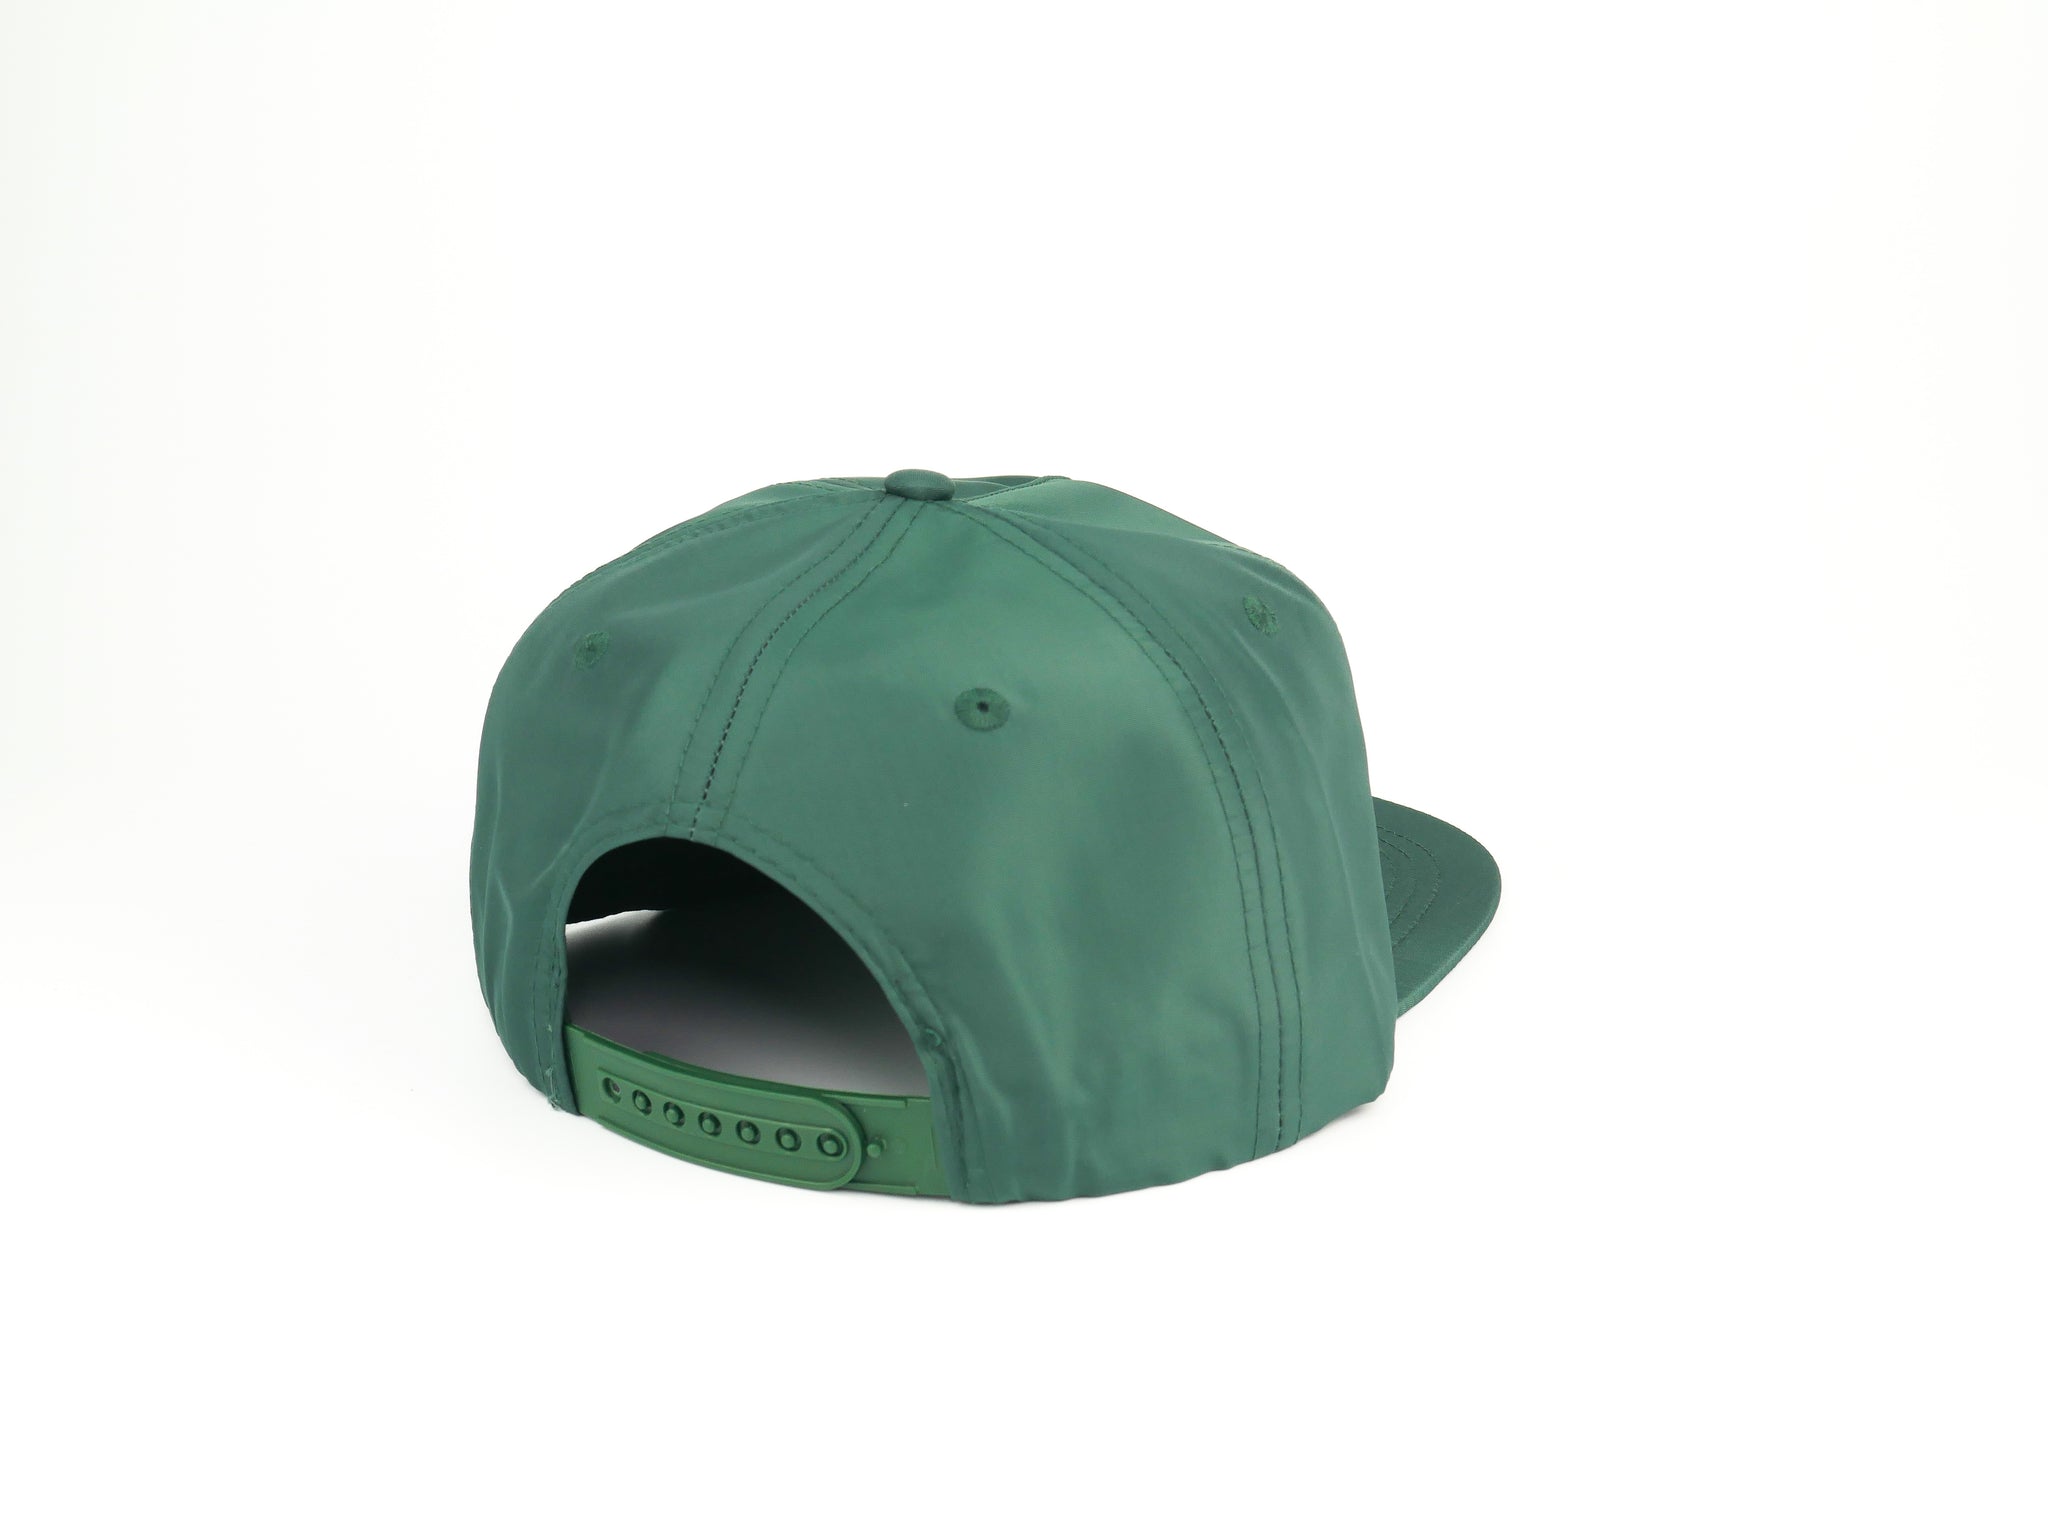 The High 5 - Nylon - Forest Green